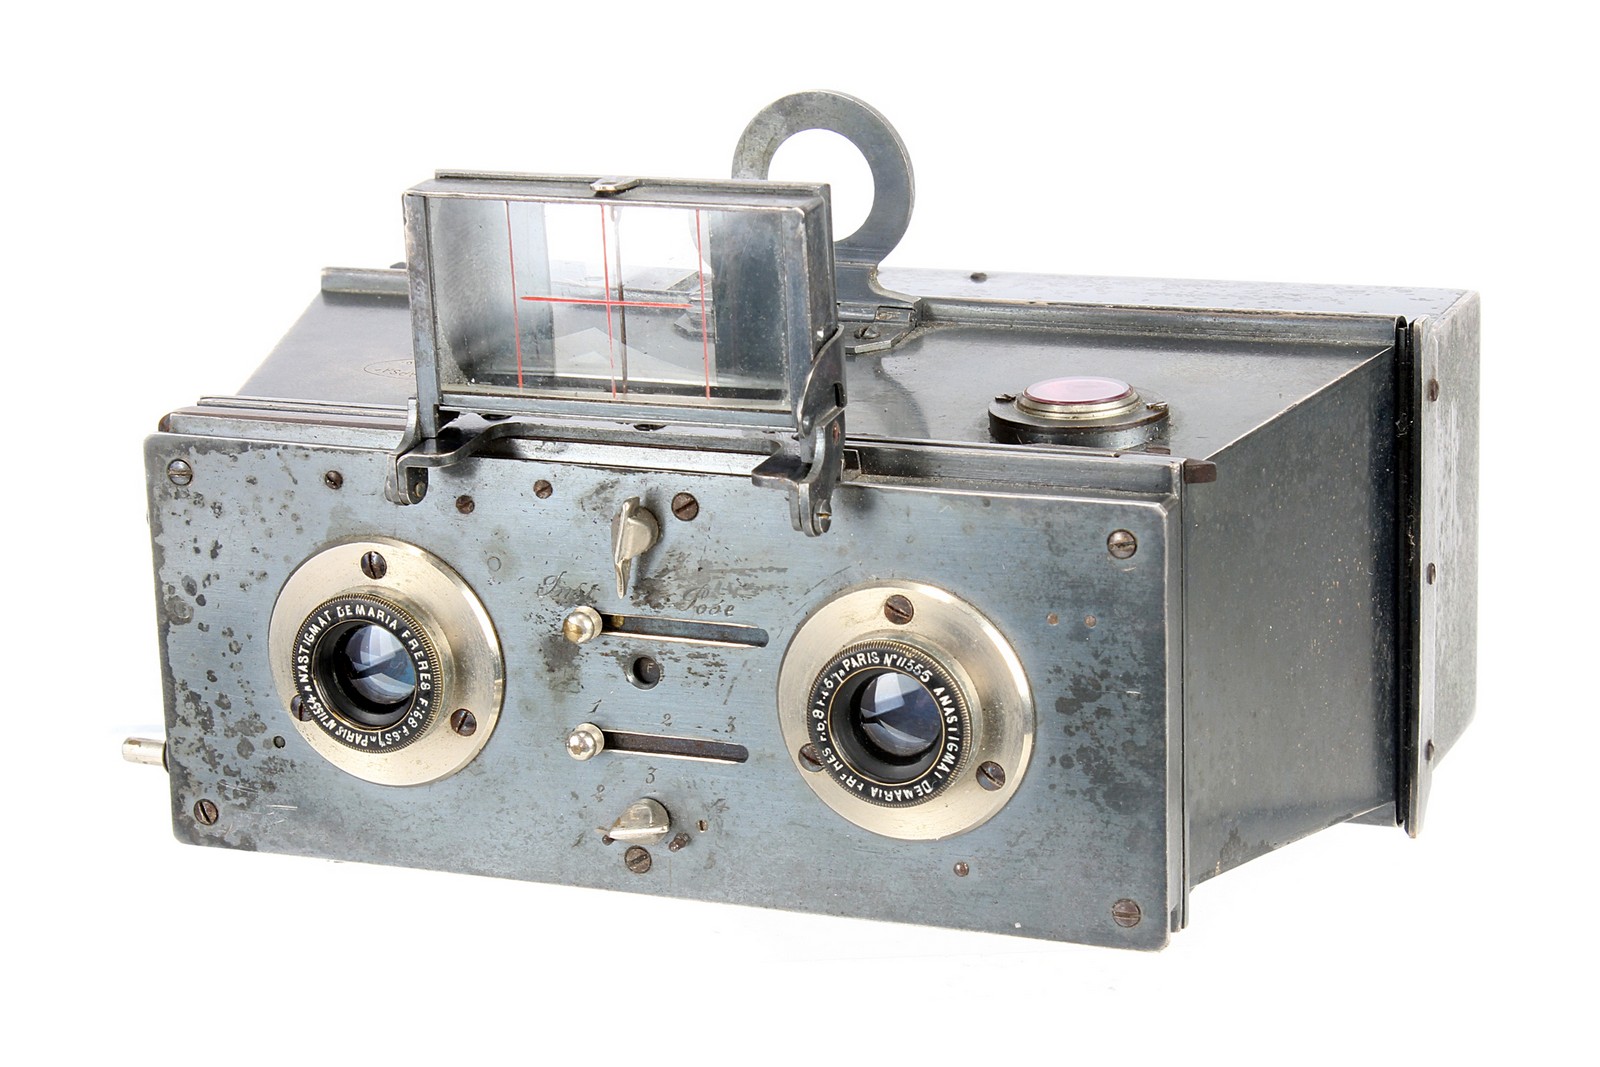 A Demaria Freres Jumelle Capsa Stereo Camera, model A, with rise and fall front, 45x107mm, with